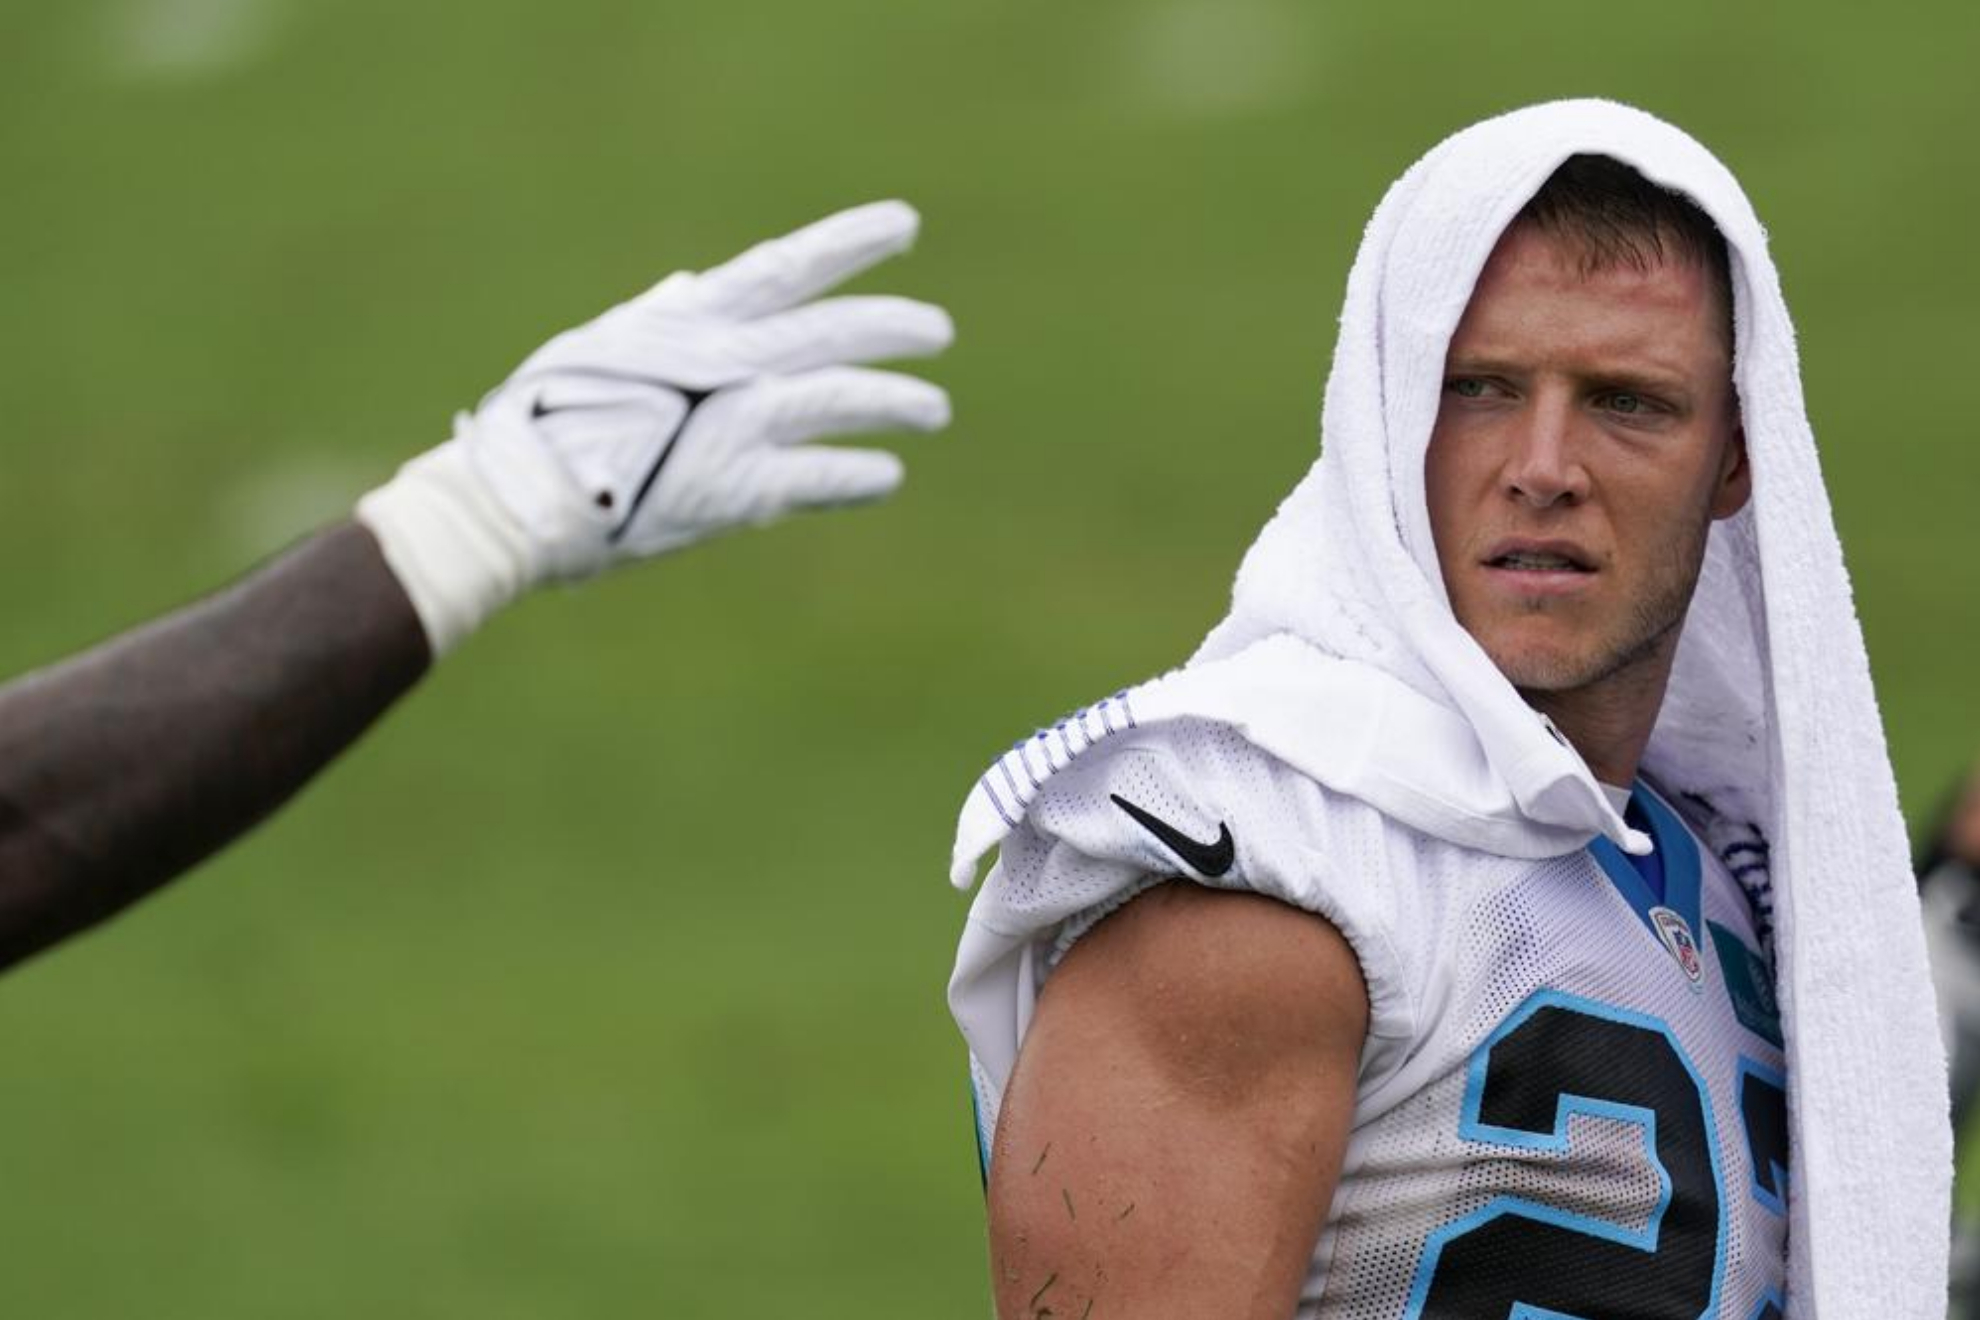 Christian McCaffrey could be traded away from the Panthers according to a report. - AP Photo/Chris Carlson